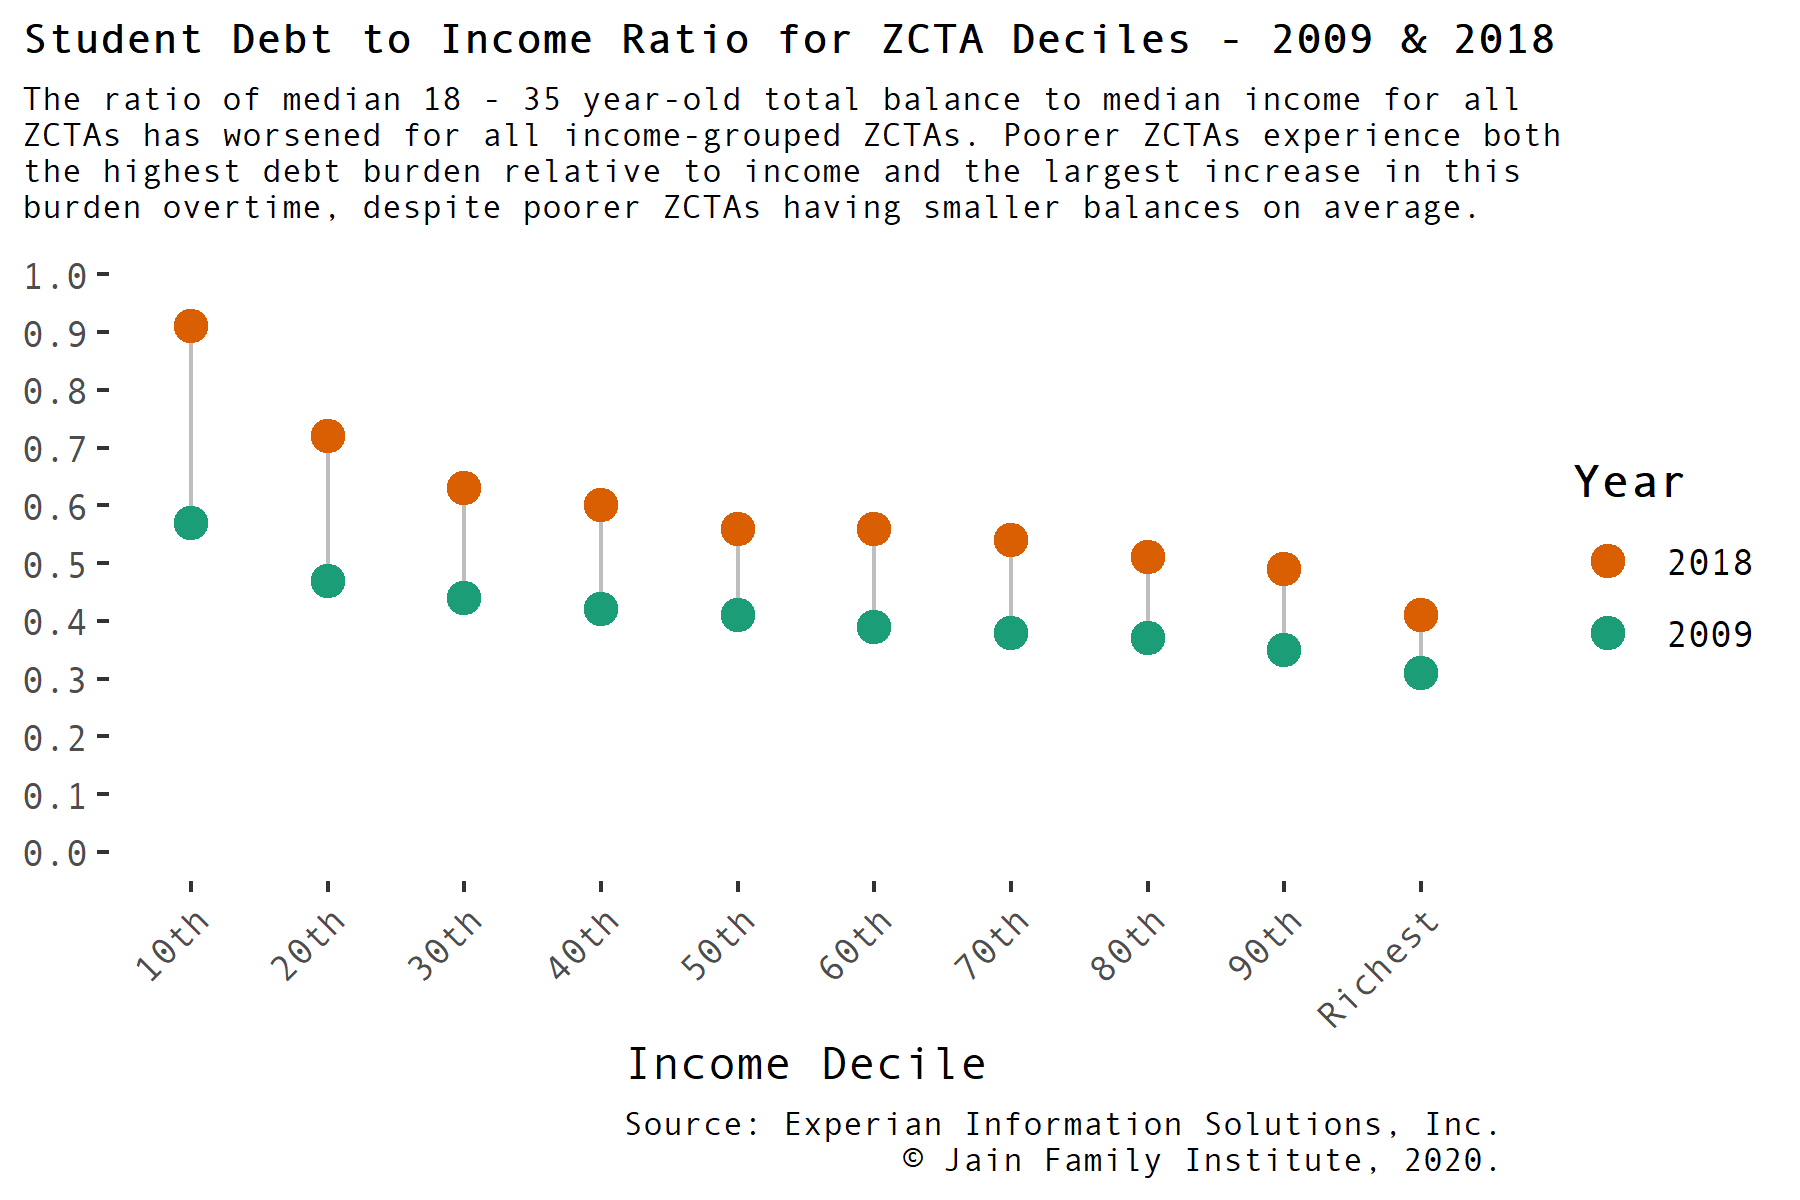 The ratio of median 18 - 35-year-old total balance to median income for all ZCTAs has worsened for all income-grouped ZCTAs. Poorer ZCTAs experience both the highest debt burden relative to income and the largest increase in this burden over time, despite poorer ZCTAs having smaller balances on average.